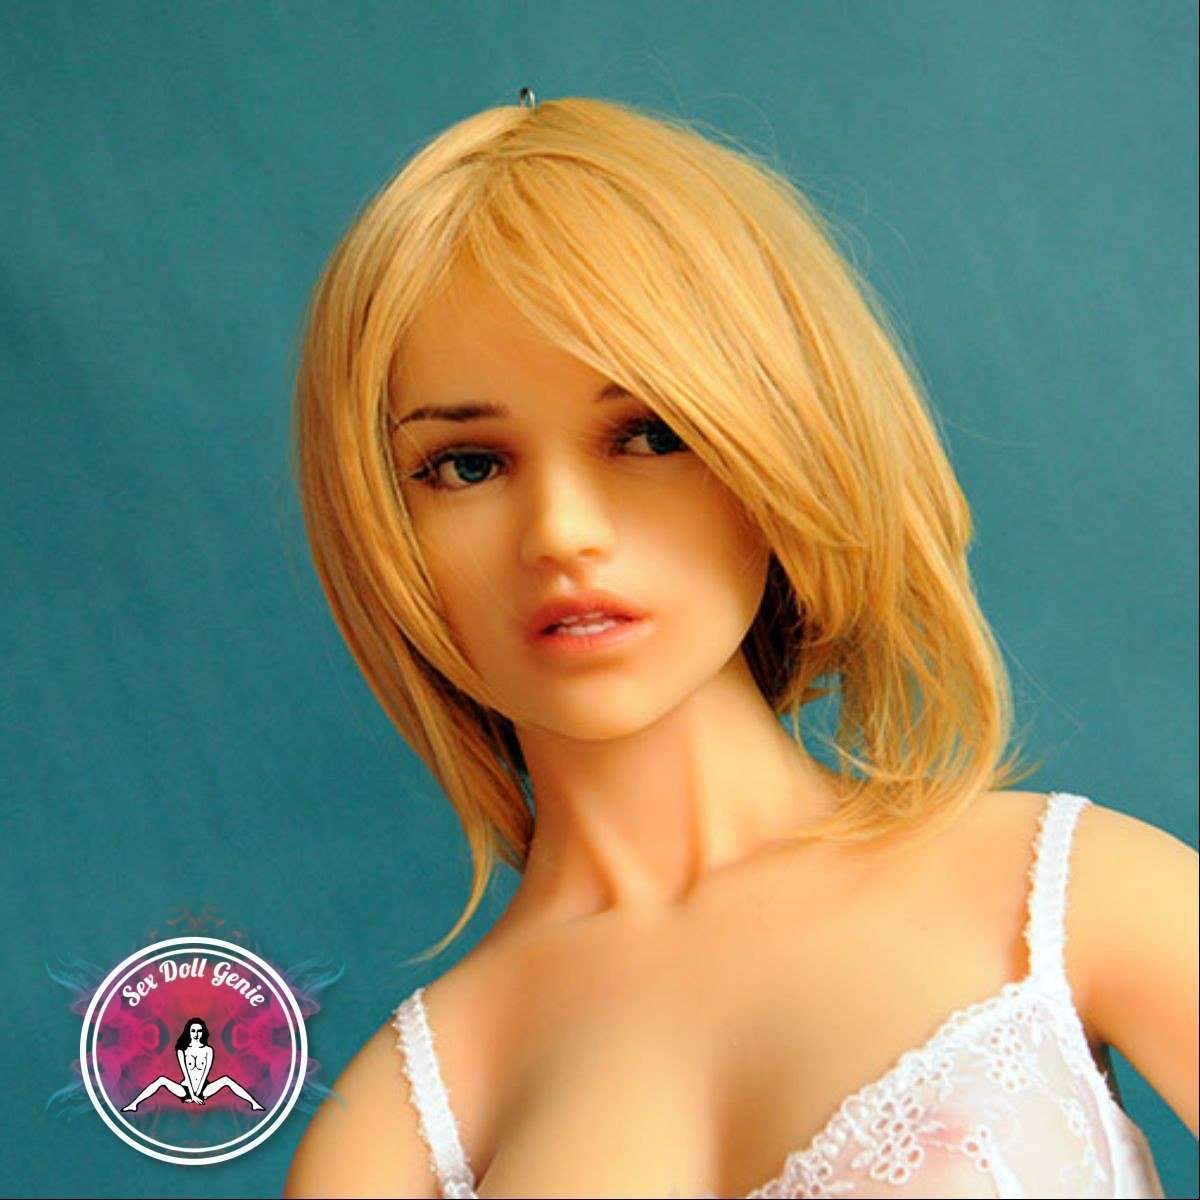 DS Doll - 158cm - Mandy Head - Type 1 D Cup Silicone Doll-9